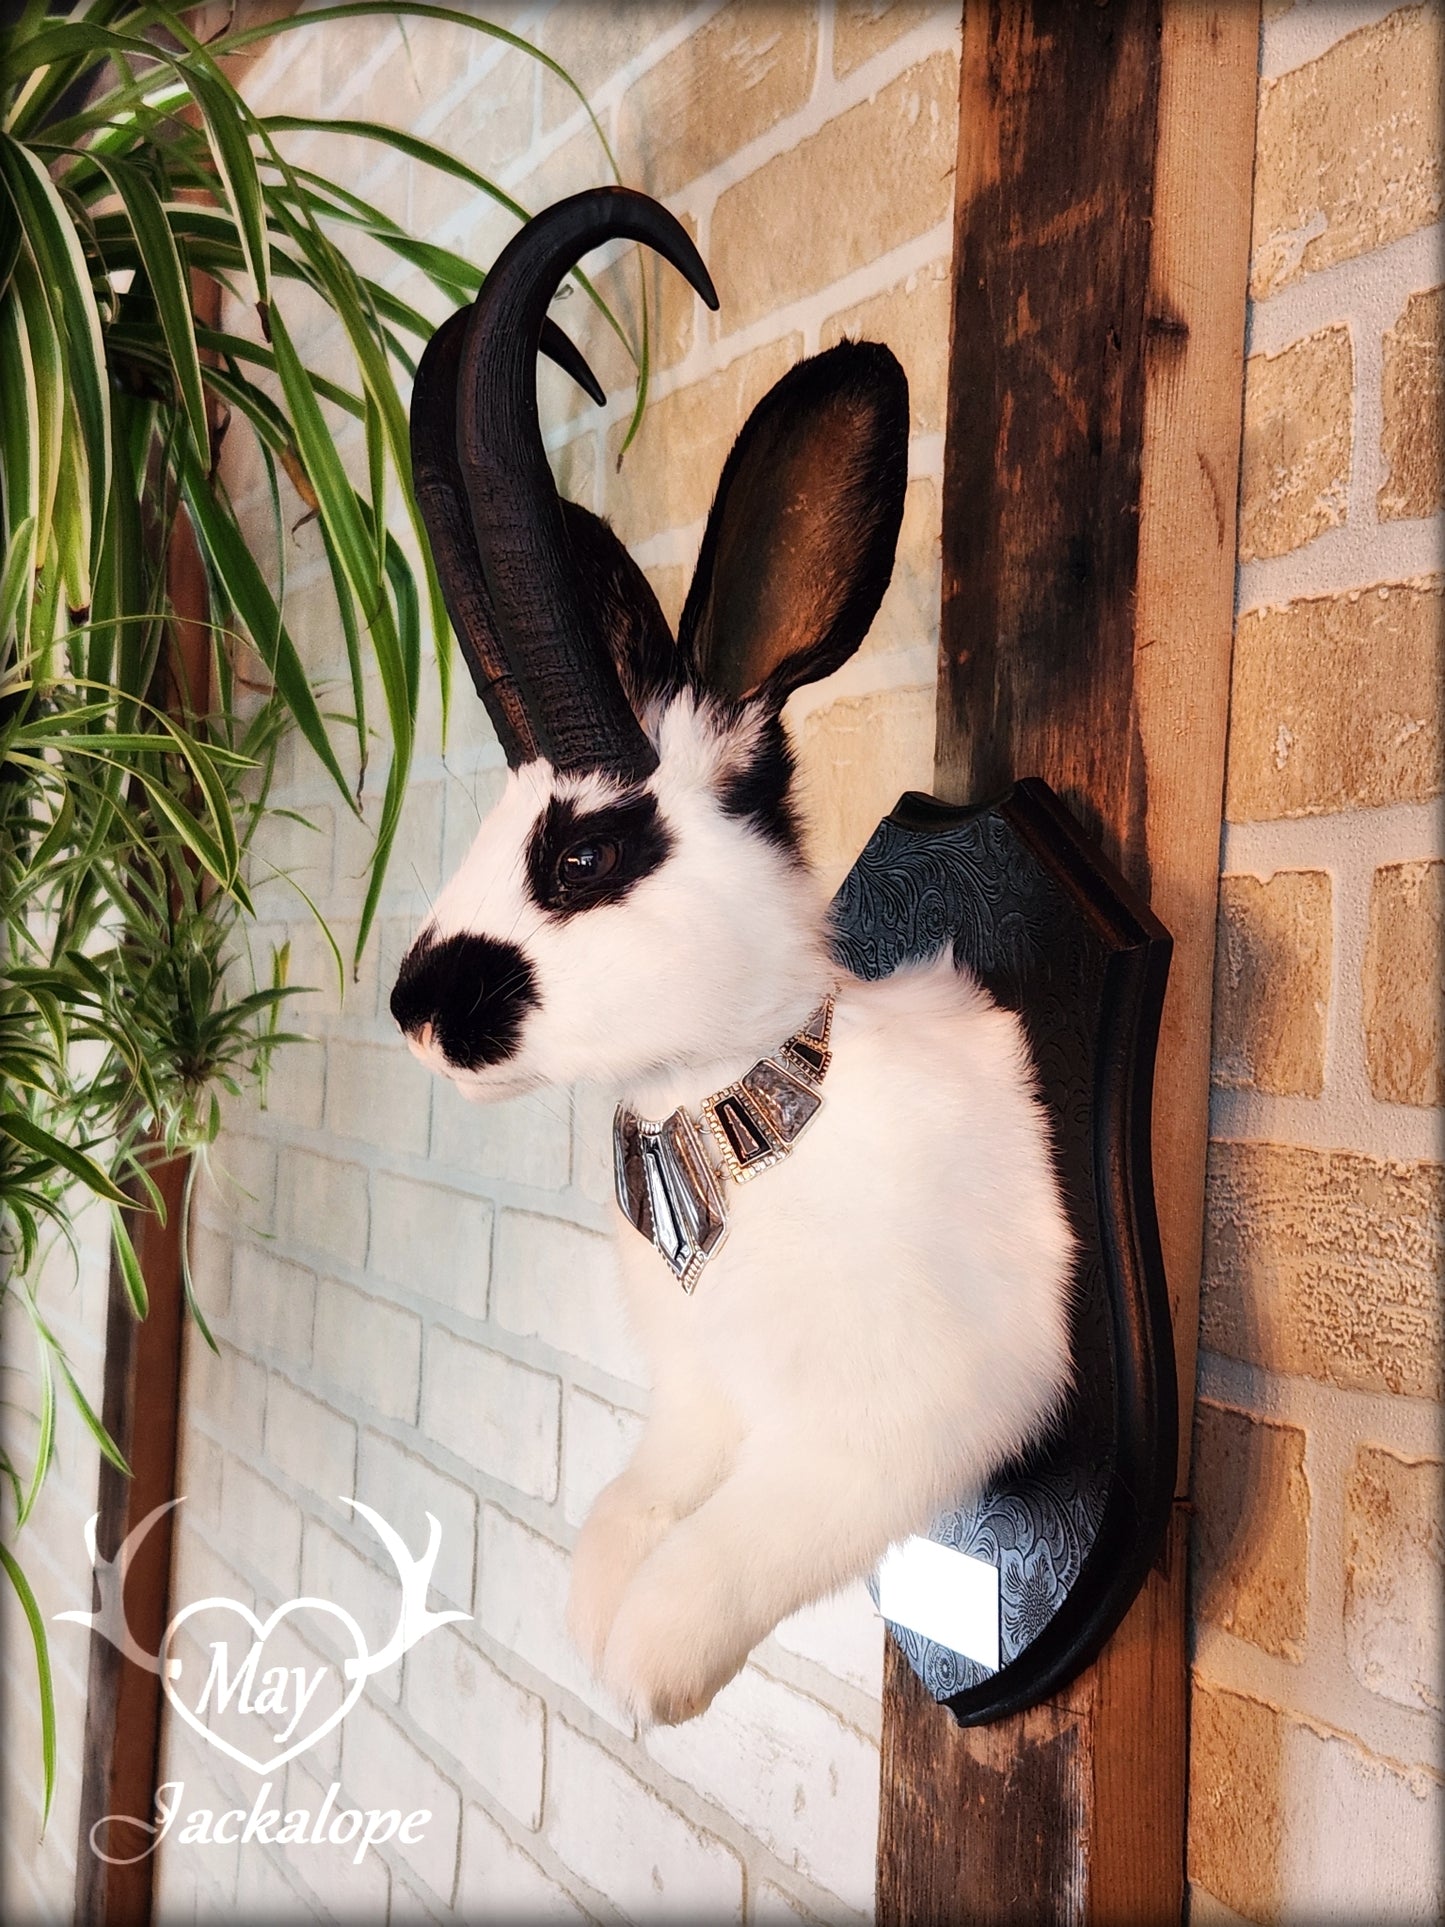 Black & white Jackalope taxidermy with black horns replica, dark eyes & with a necklace.